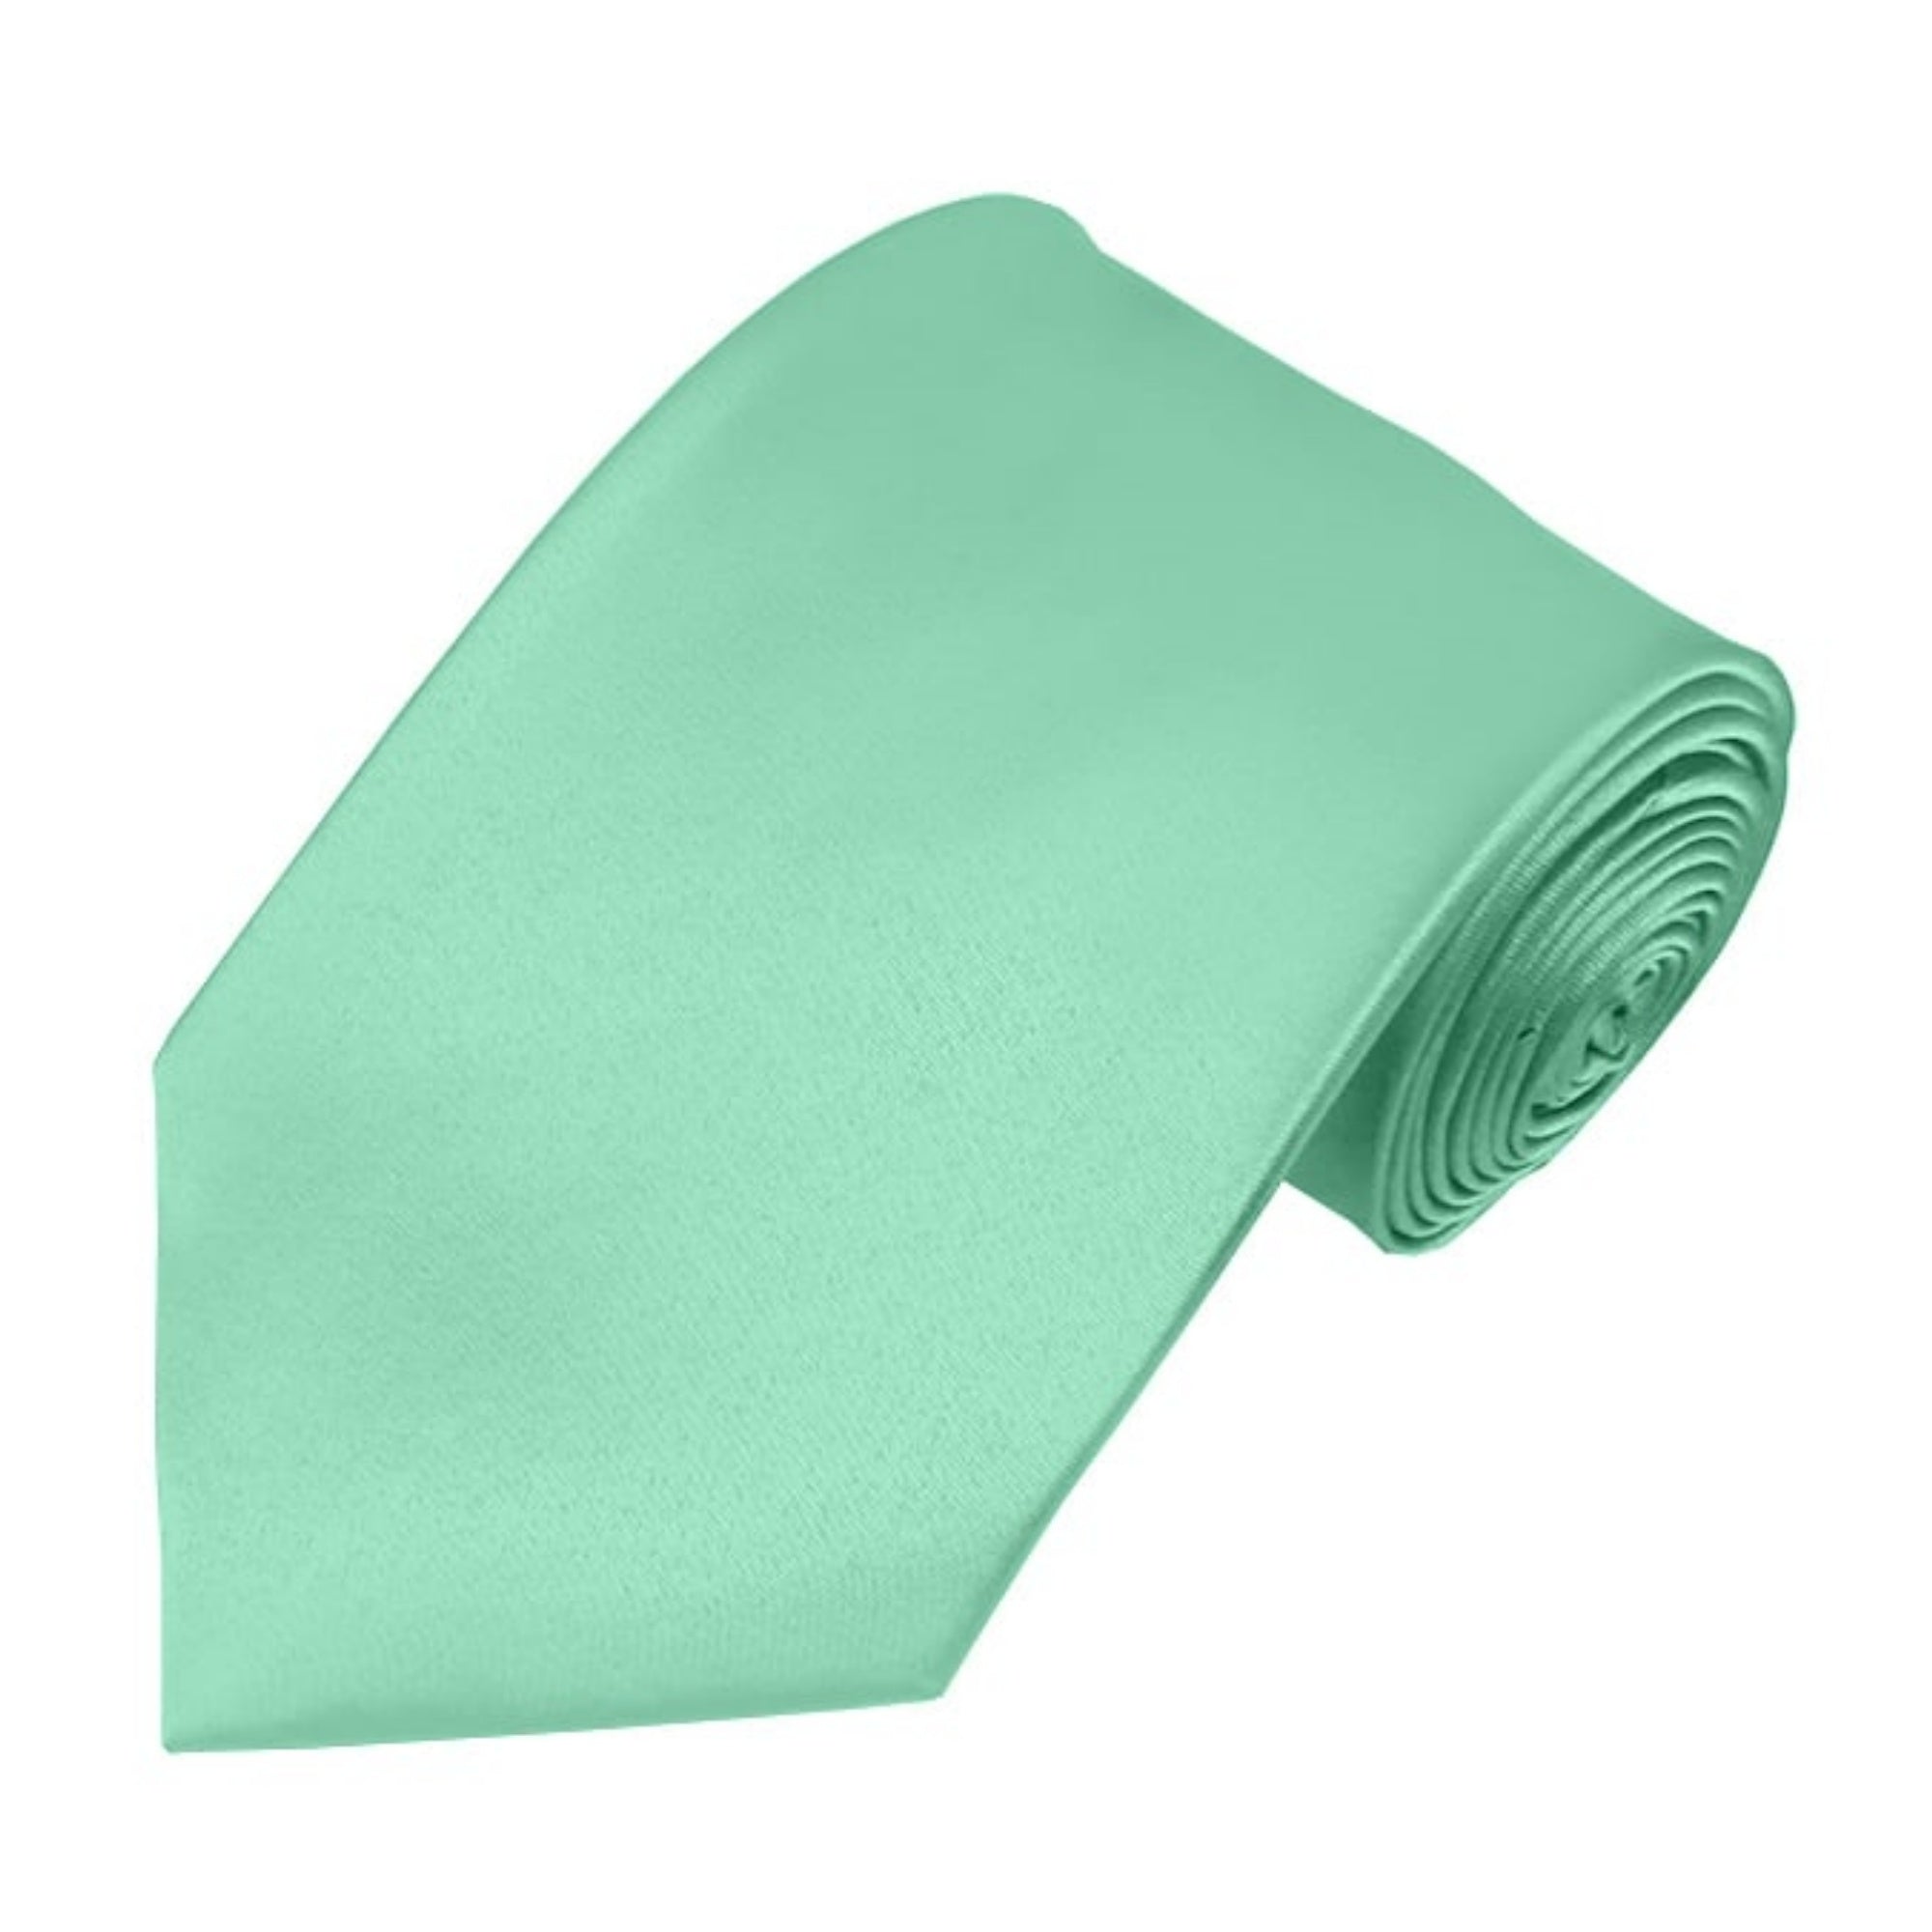 TheDapperTie Men's Solid Color Traditional 3.35 Inch Wide And 58 Inch Long Neckties Neck Tie TheDapperTie Aqua Green  